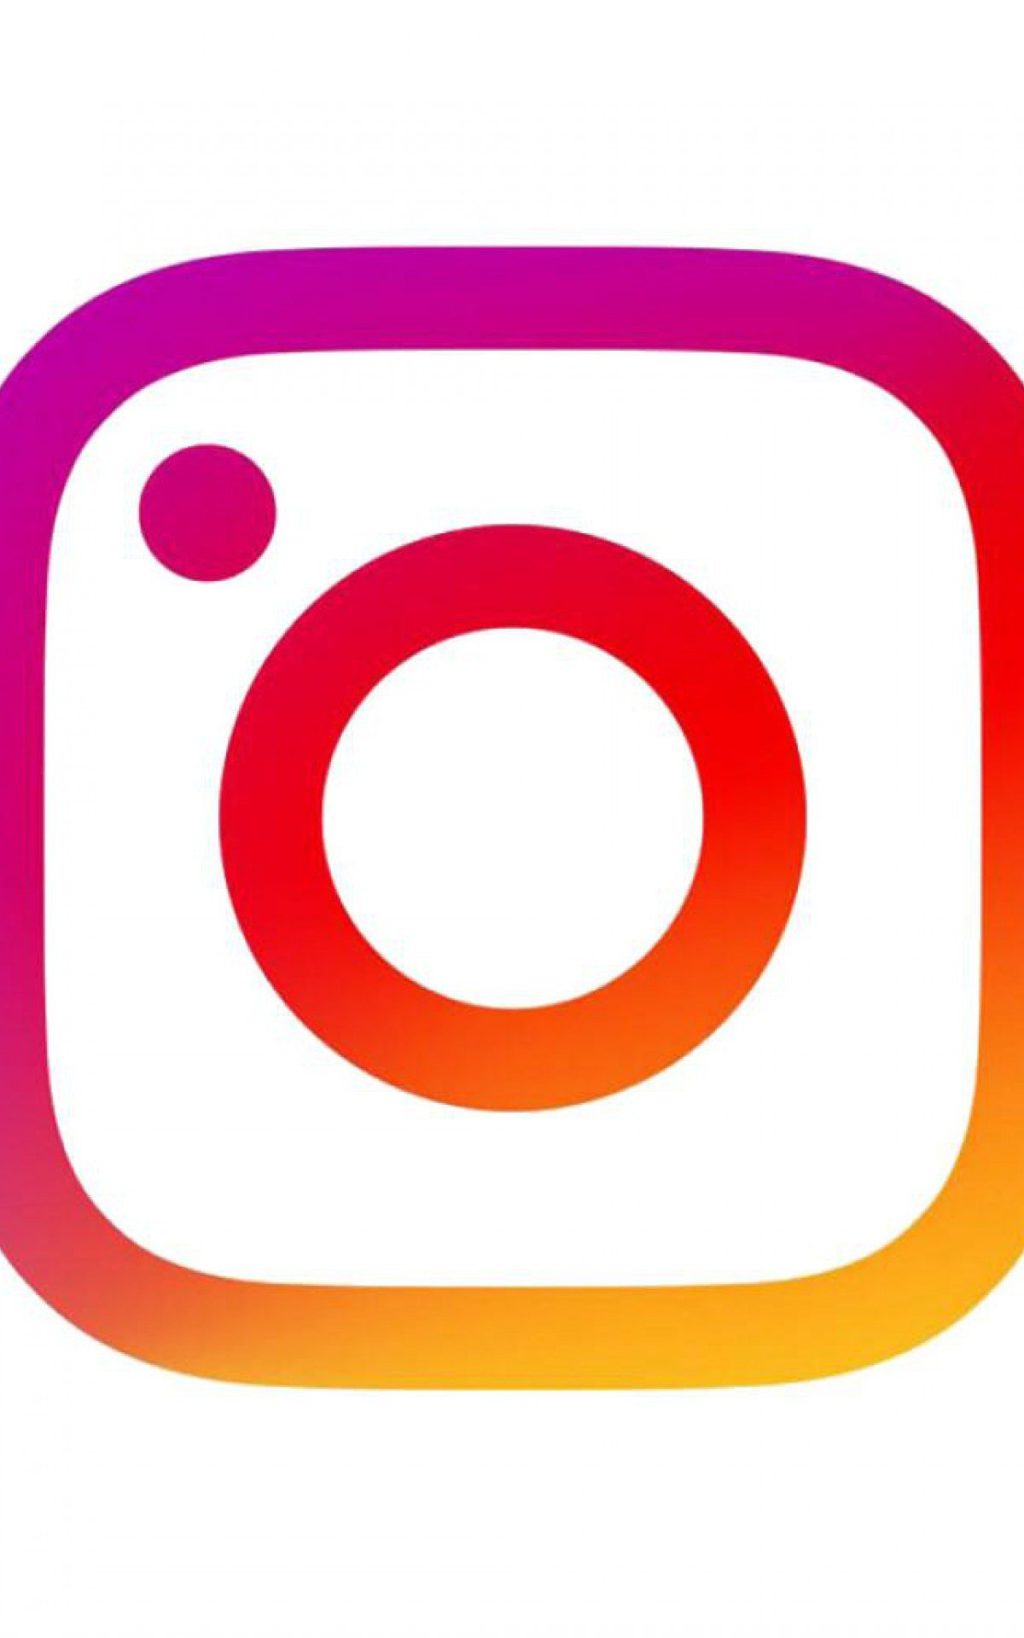 Instagram suspends user accounts around the world |  world and science